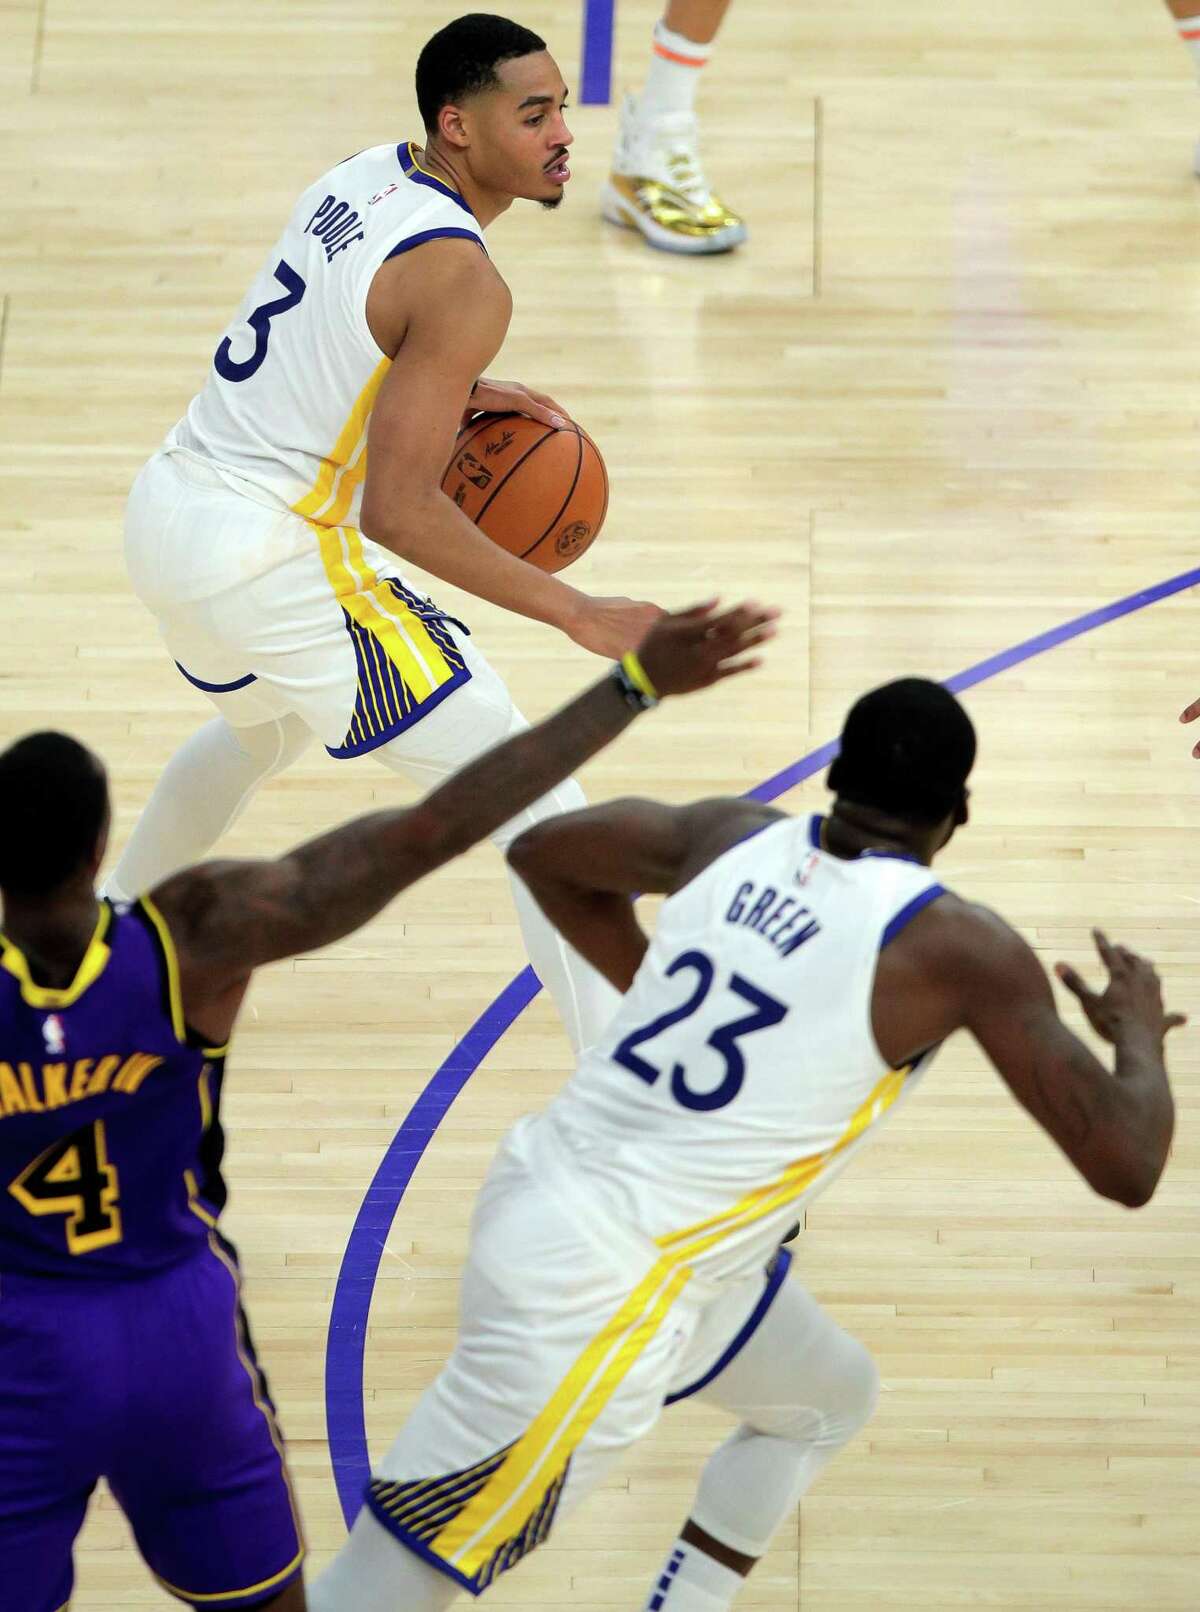 Jordan Poole (3) sees Draymond Green (23) with a clear lane before passing to him for a basket in the first half as the Golden State Warriors played the Los Angeles Lakers in their home opener at Chase Center in San Francisco, Calif., on Tuesday, October 18, 2022.